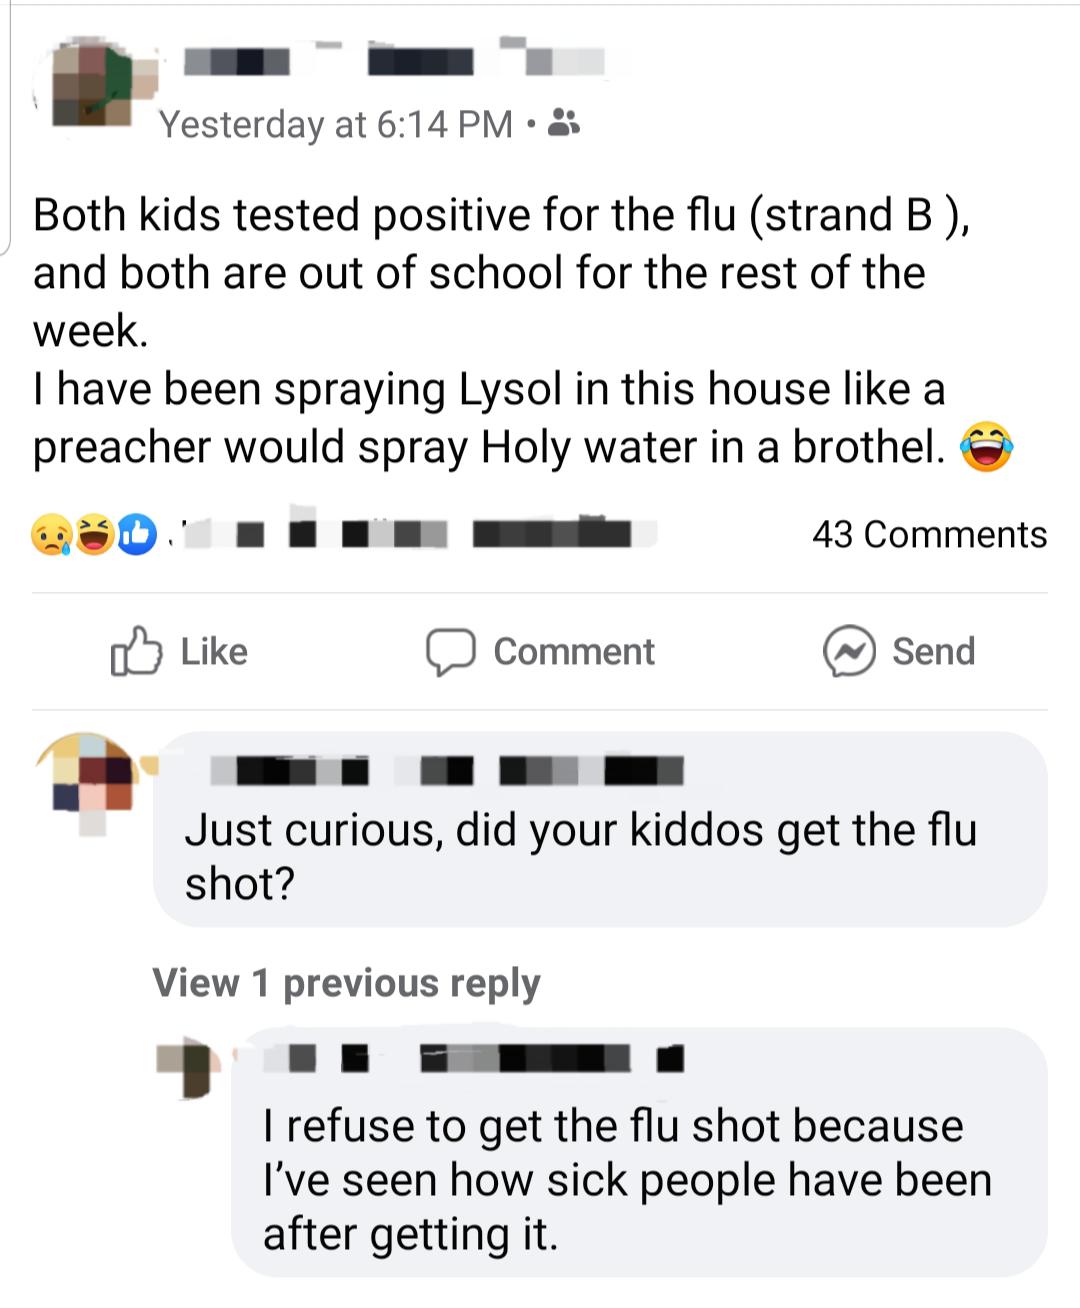 document - Yesterday at Both kids tested positive for the flu strand B, and both are out of school for the rest of the week. I have been spraying Lysol in this house a preacher would spray Holy water in a brothel. 43 a Comment Send Just curious, did your 